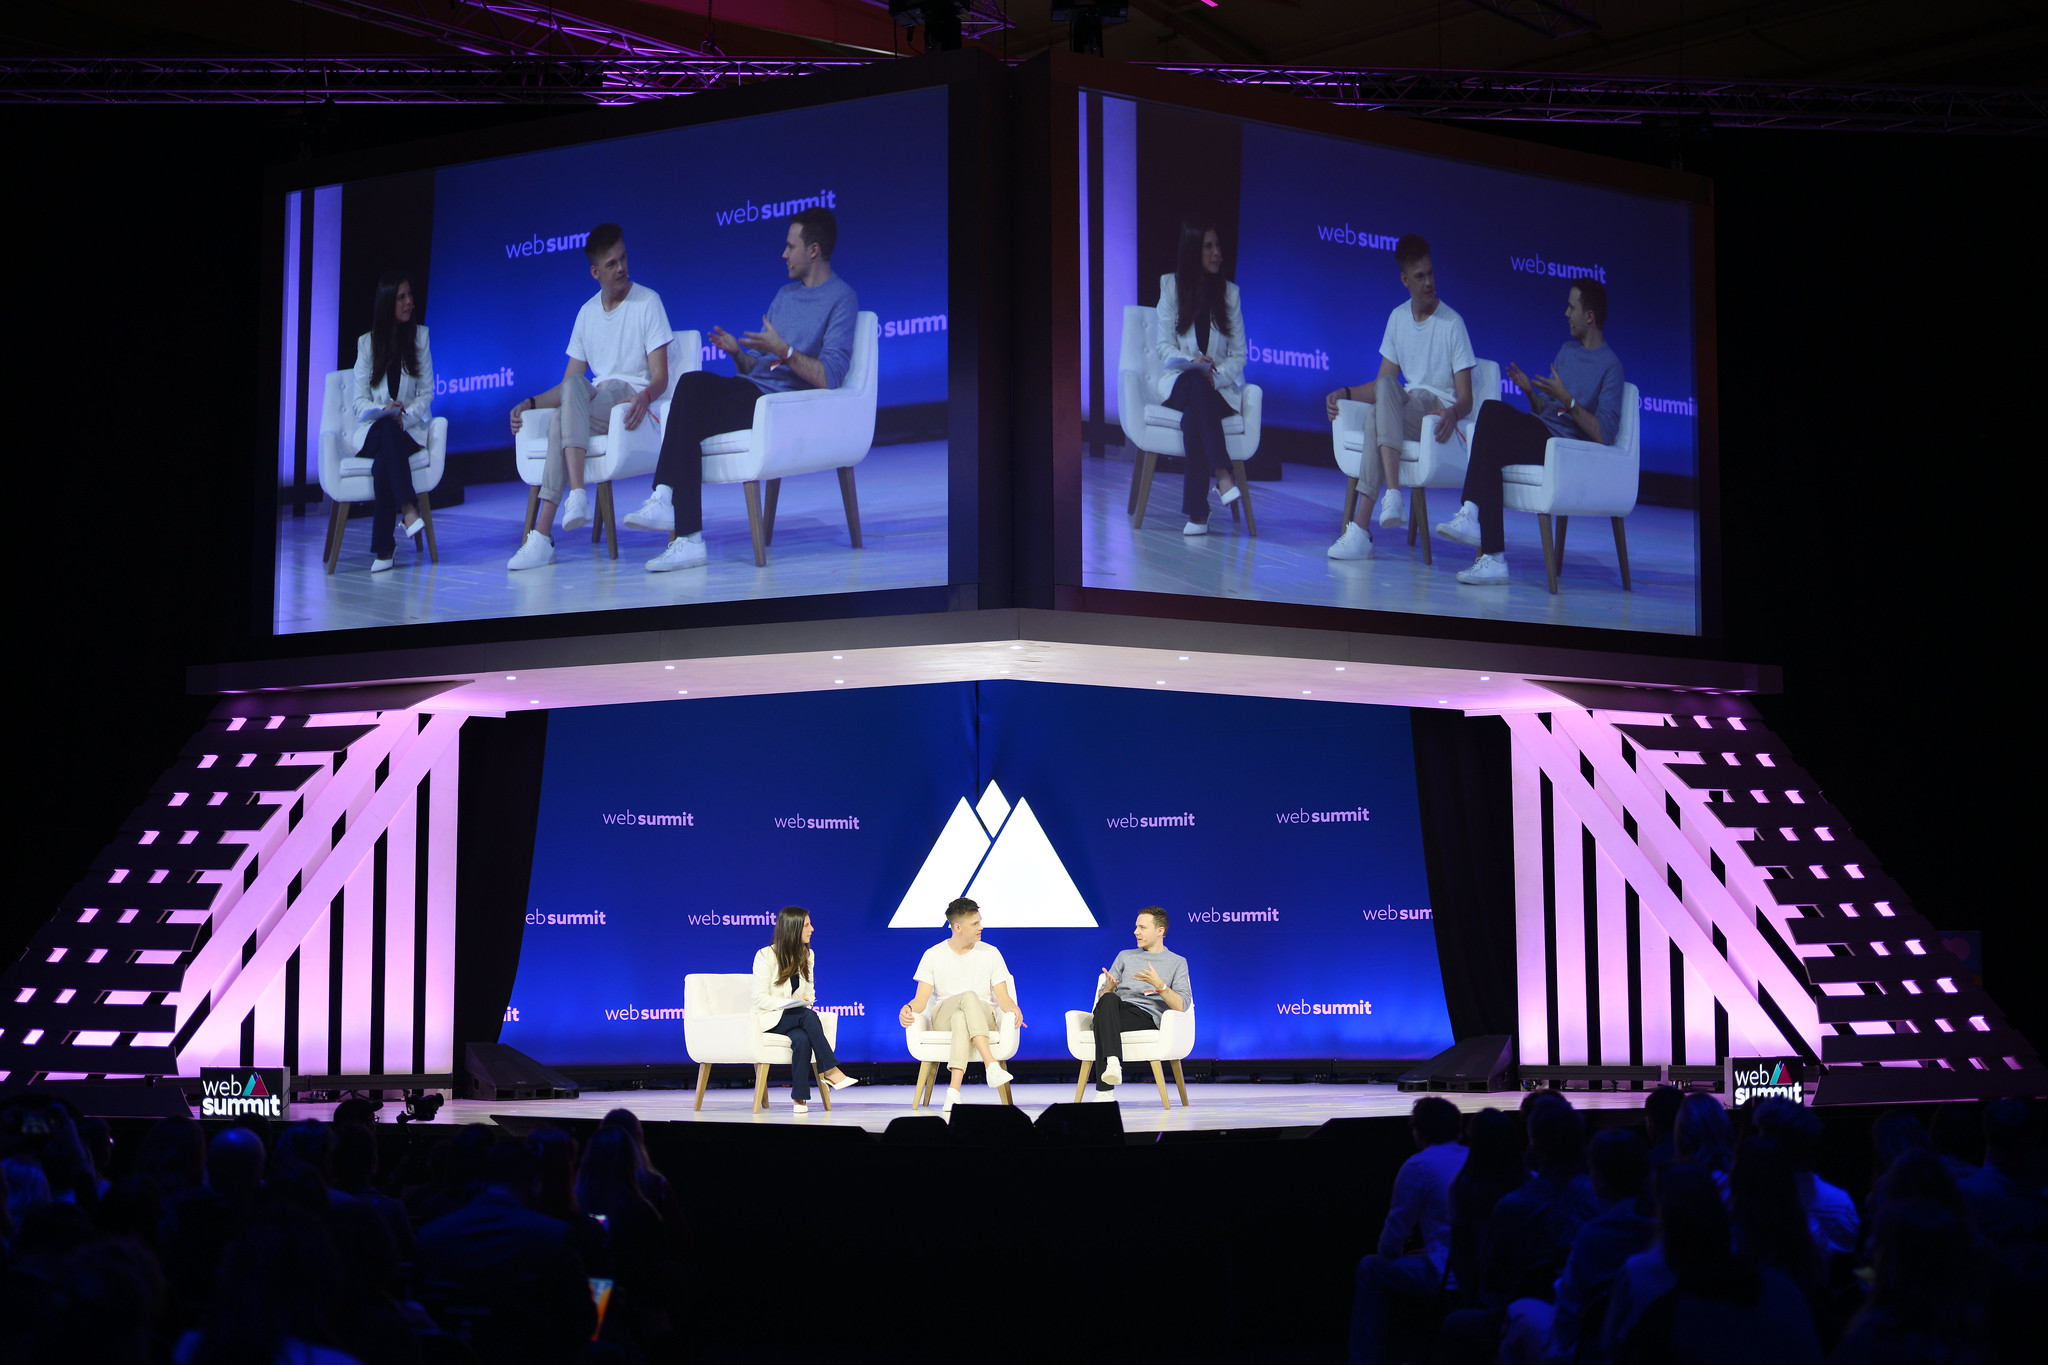 An event stage viewed over the heads of a packed audience. Three people sit on stage. Two large screens over the stage show a close-up of these people. The Web Summit logo is visible behind the people.